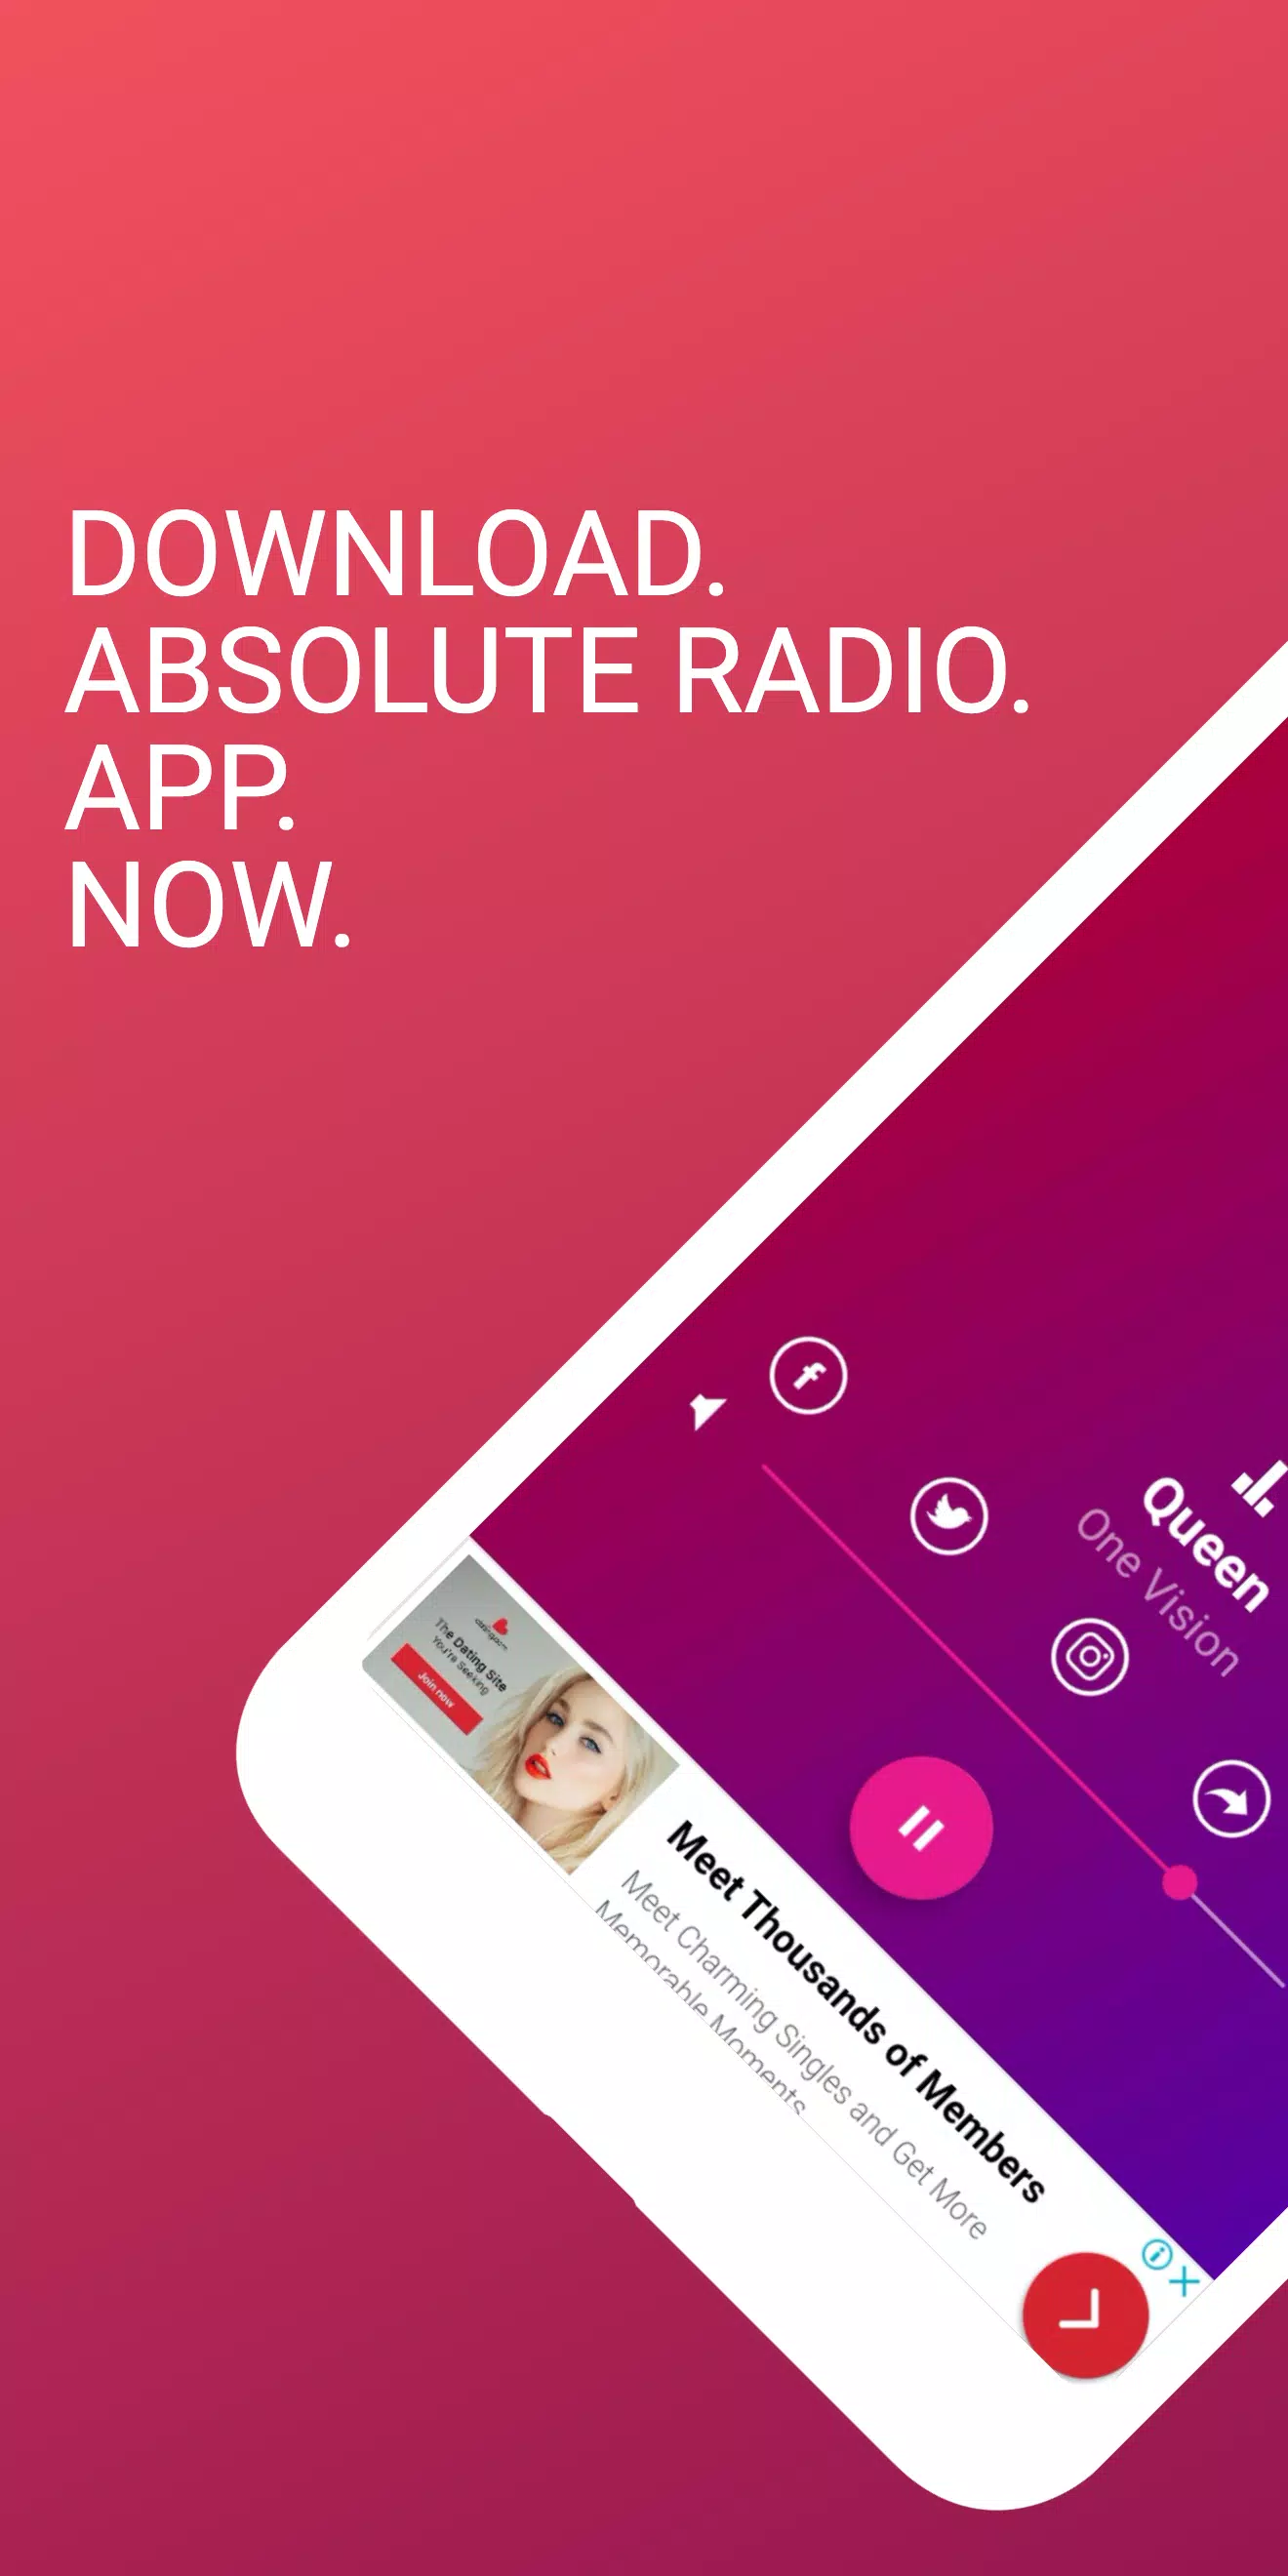 Absolute Radio for Android - APK Download